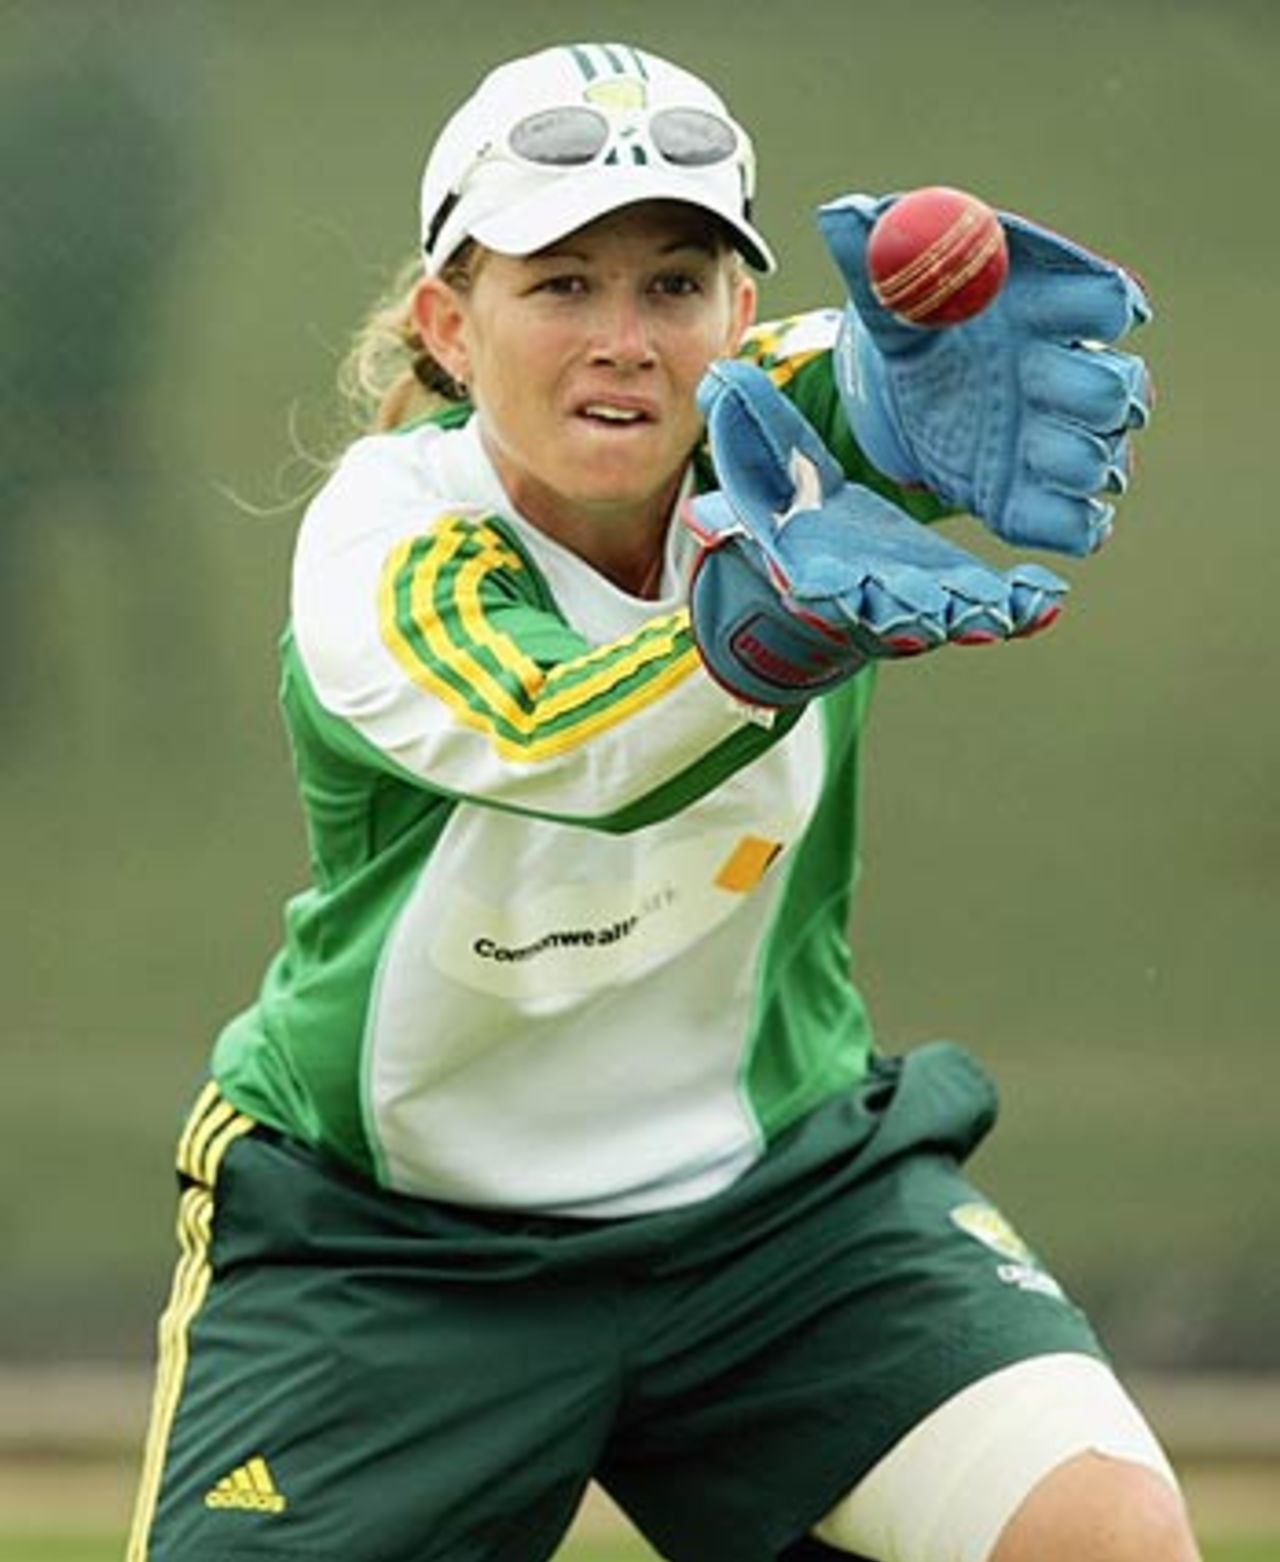 Jodie Purves at a practice session before the first Test against India, Adelaide Oval, February 17 2006